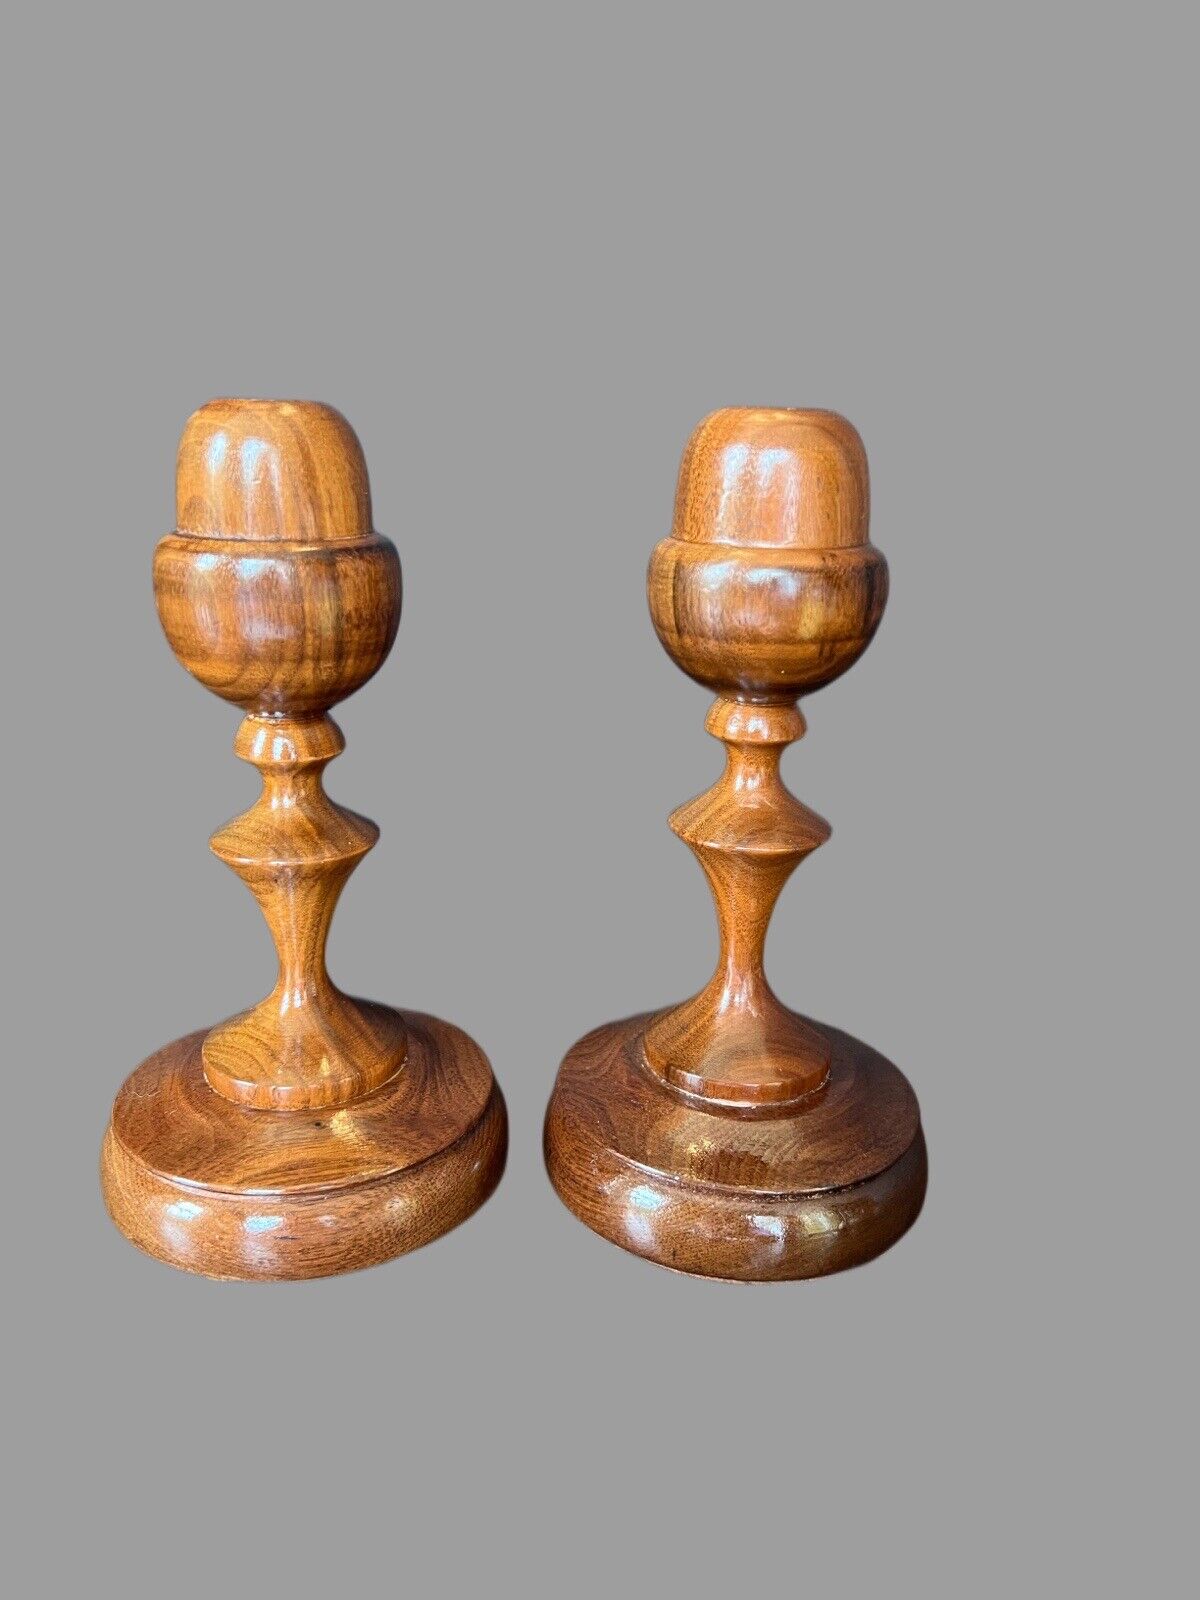 Vintage Pair Of Turned Solid Wood Candle Stick Holders Acorn Tops 6.75” Tall